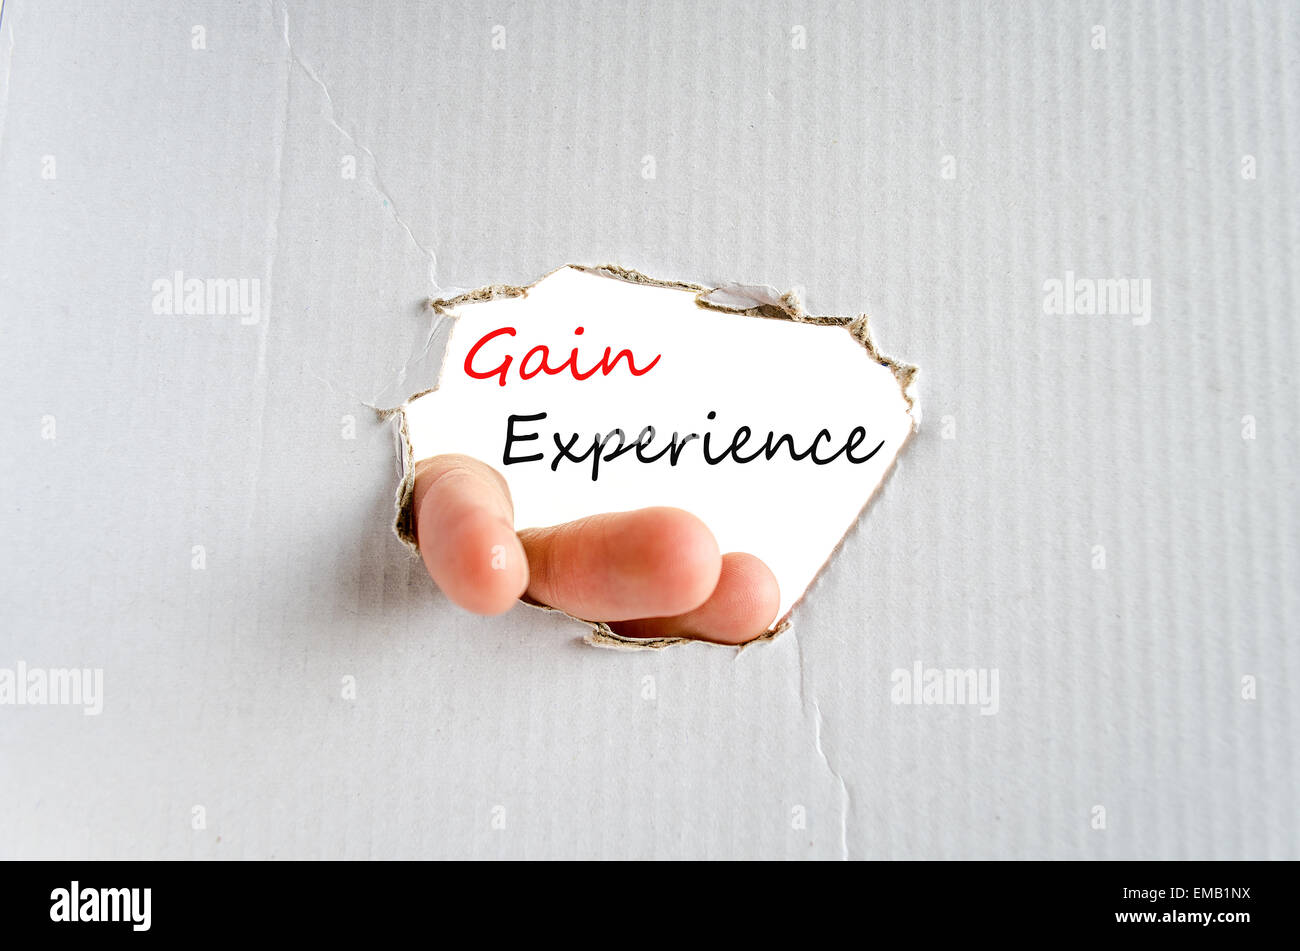 Gain Experience Concept Isolated Over White Background Stock Photo